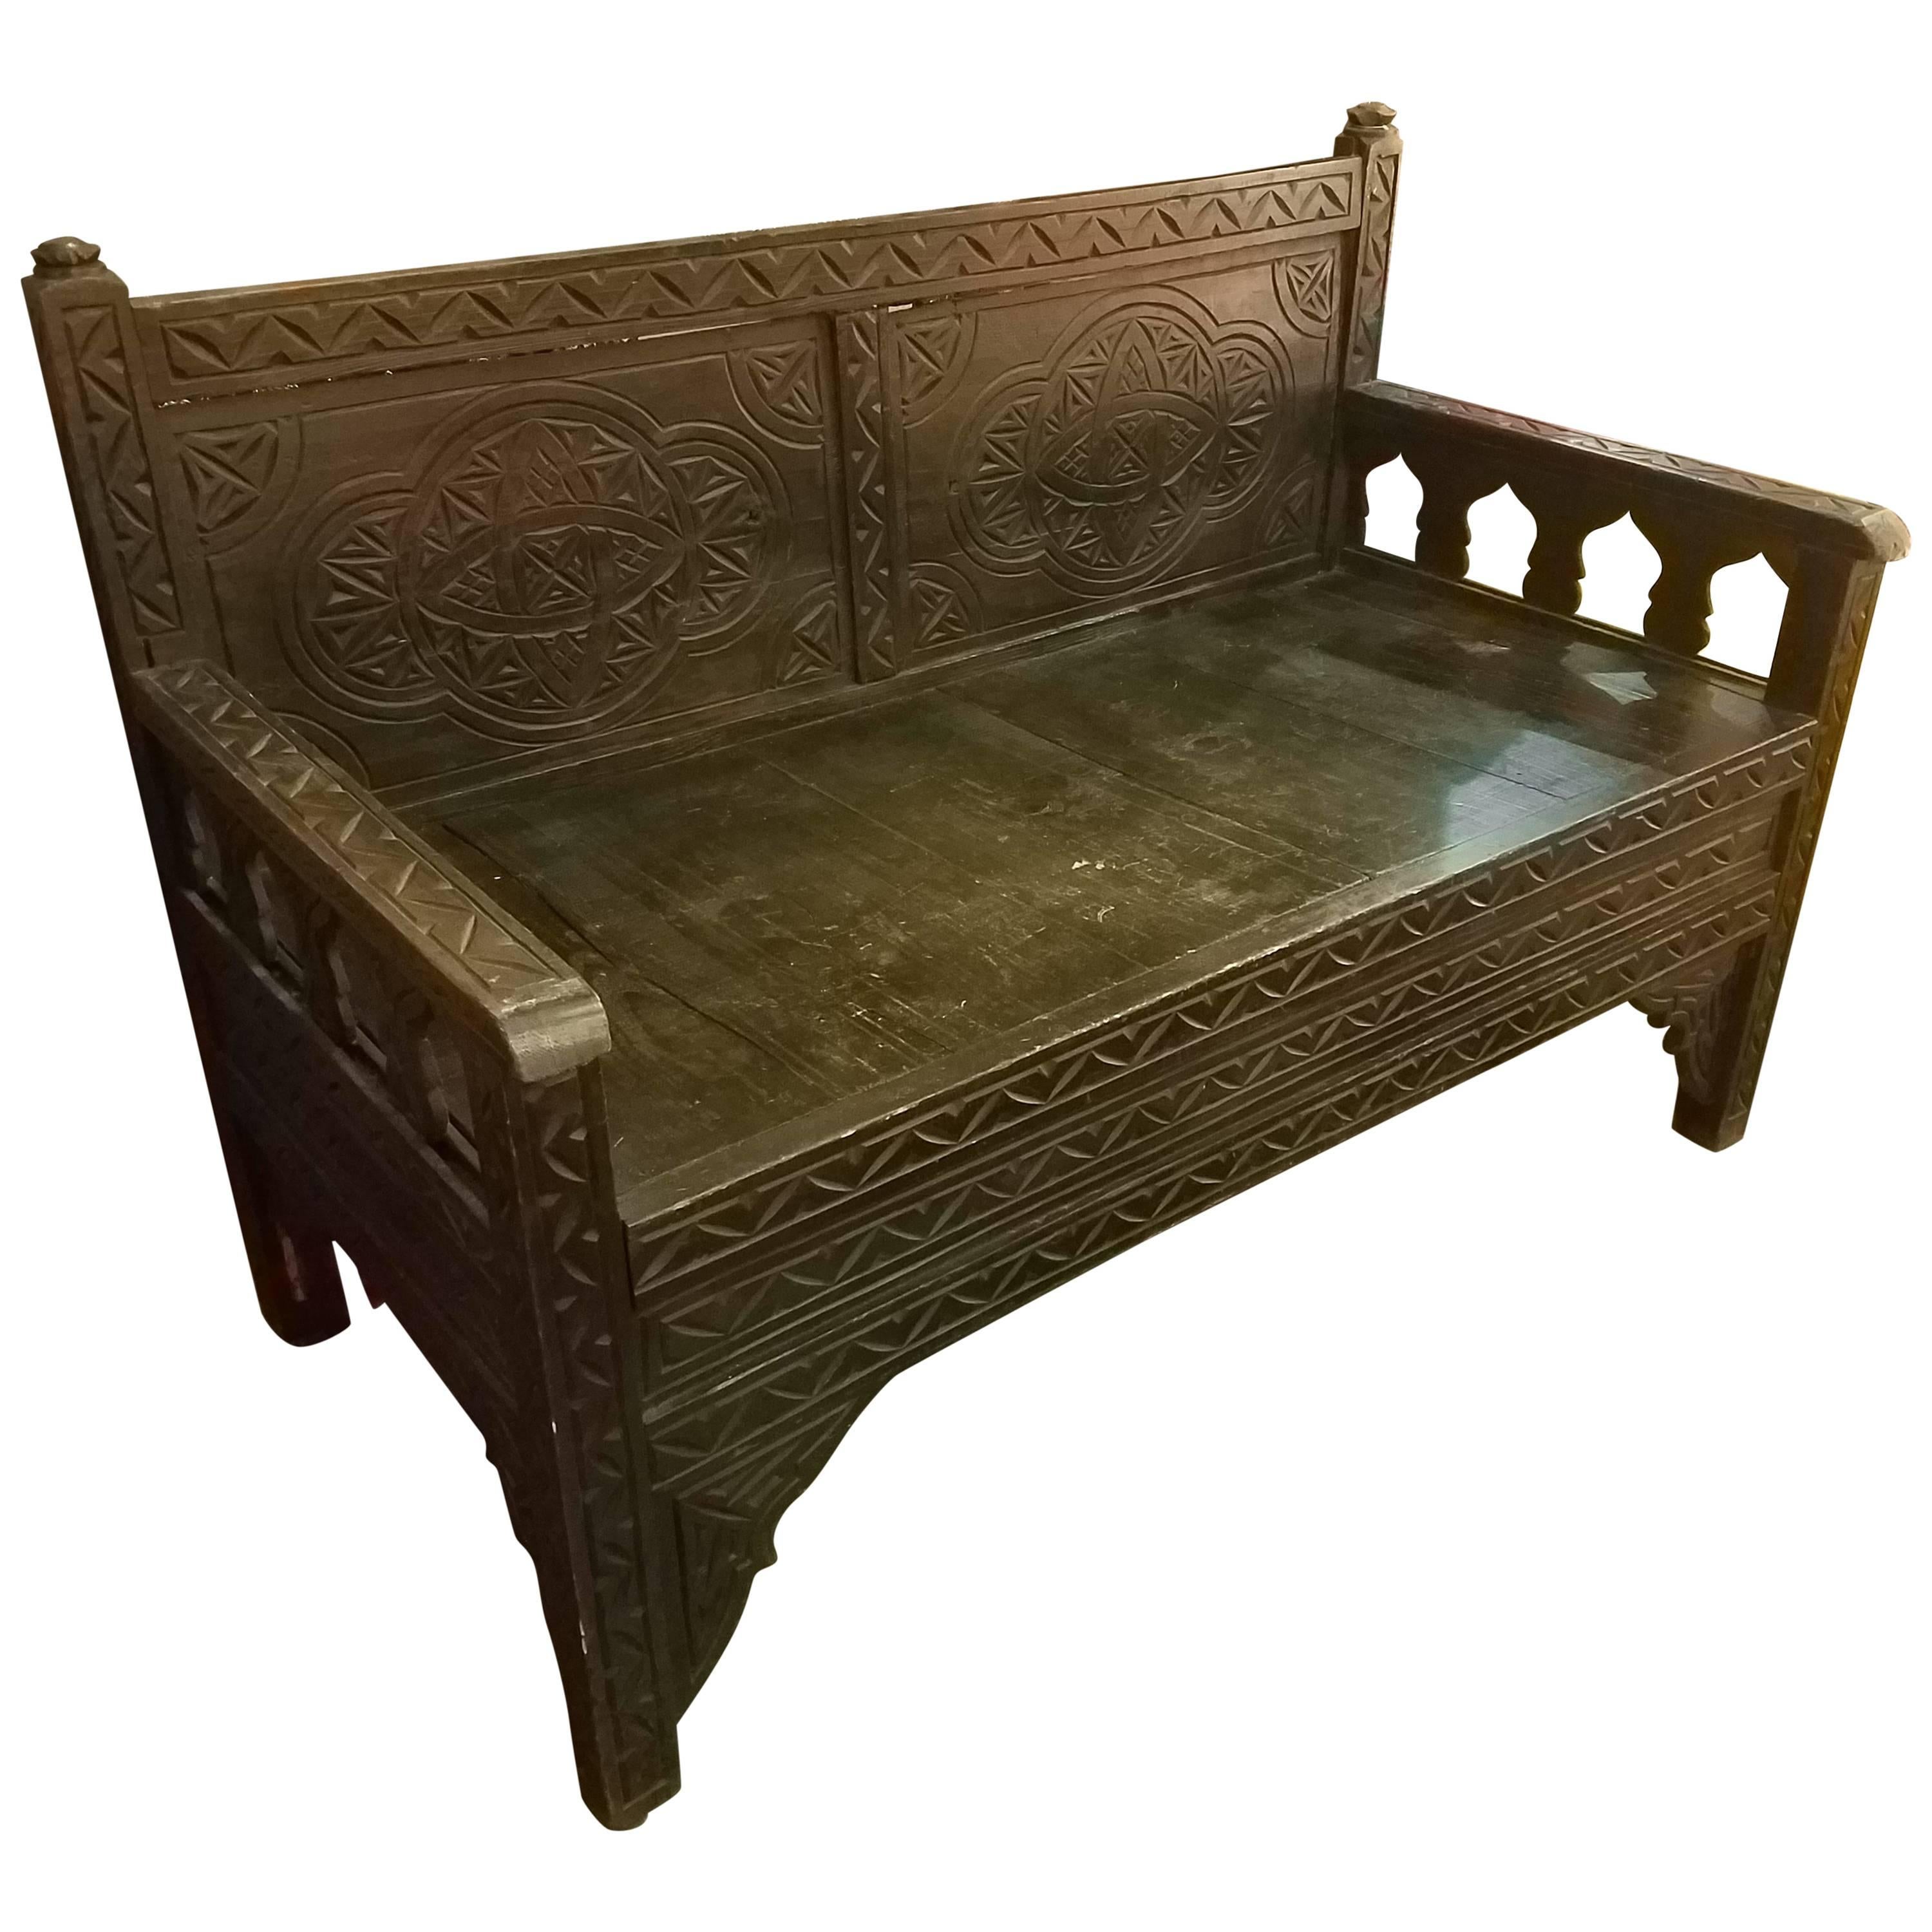 Old Moroccan Hand-Carved Wooden Bench, Cedar Wood